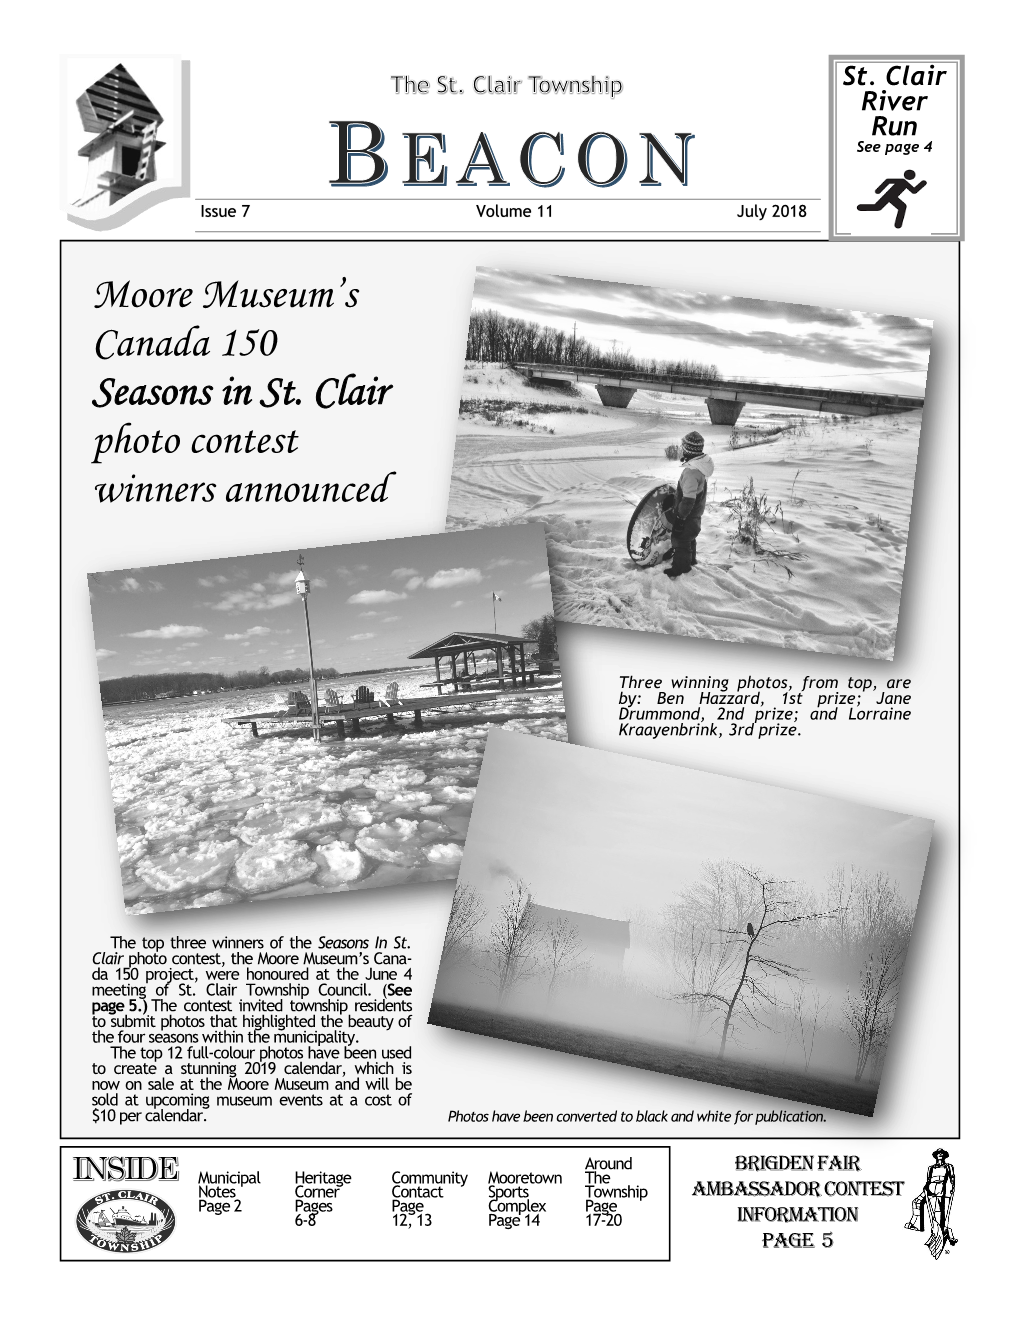 Moore Museum's Canada 150 Seasons in St. Clair Photo Contest